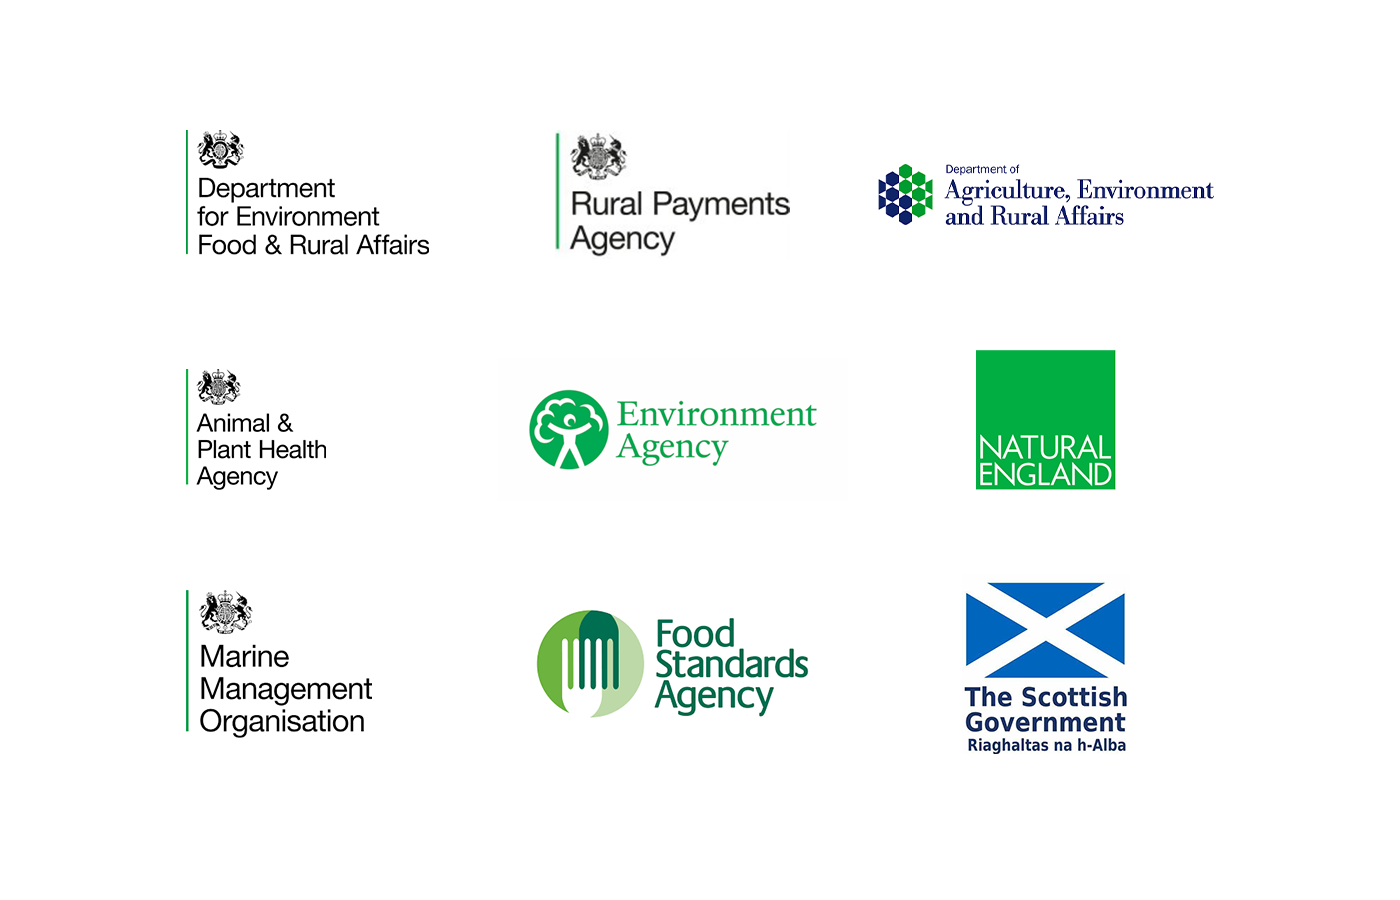 Department for Environment and Rural Affairs, Rural Payments Agency, Agriculture, Environment and Rural Affairs, Natural England, Food standards agency,  Marine management organisation, The Scottish government